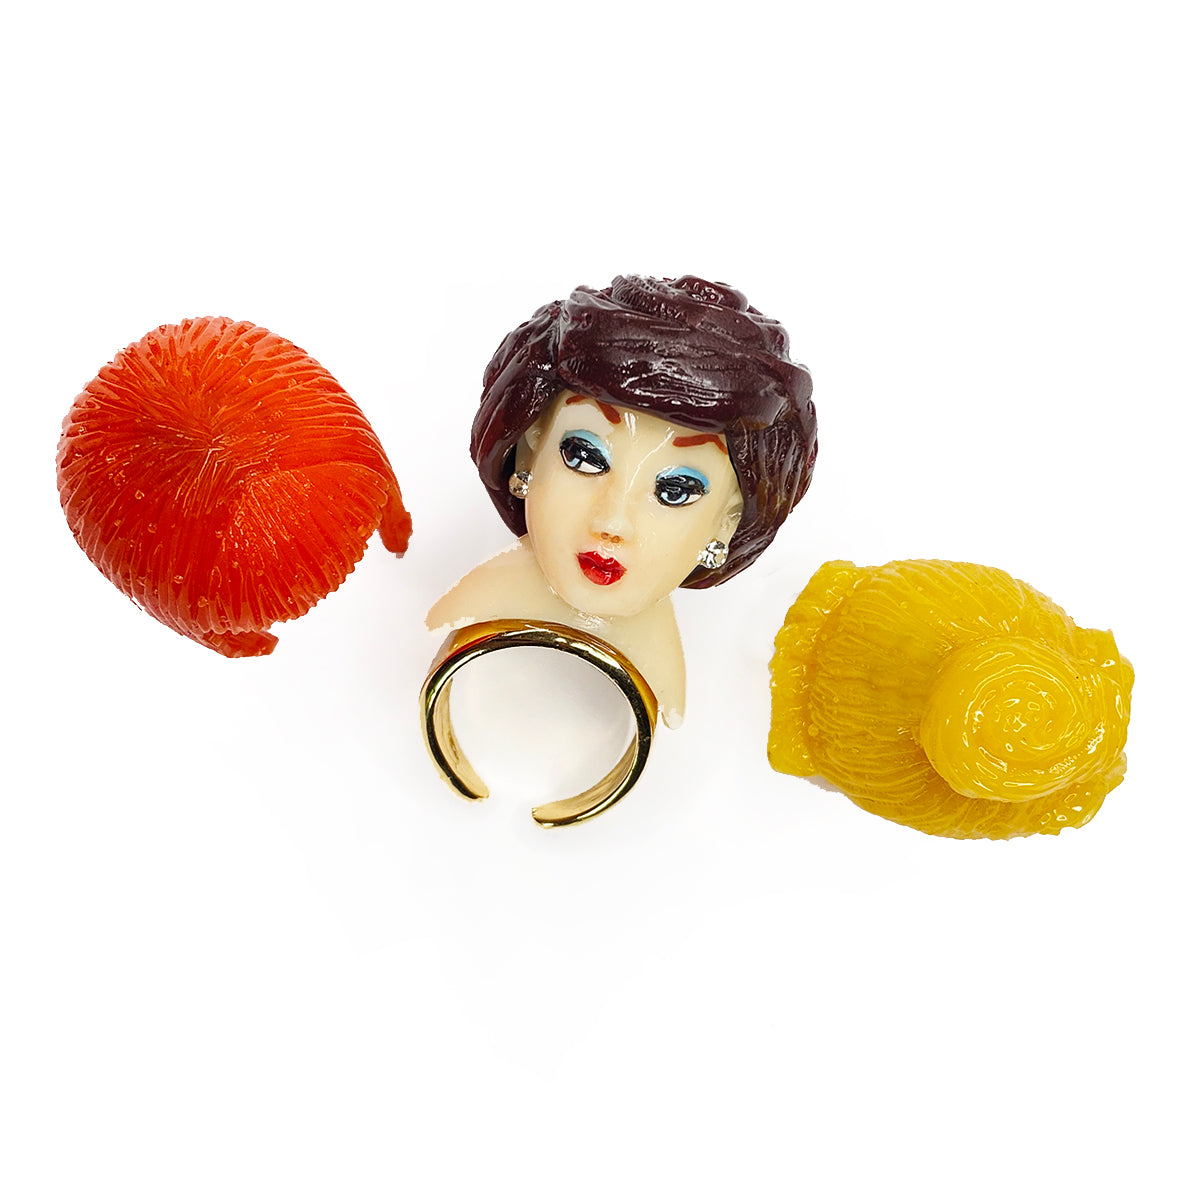 DOLL CHANGEABLE WIG RING